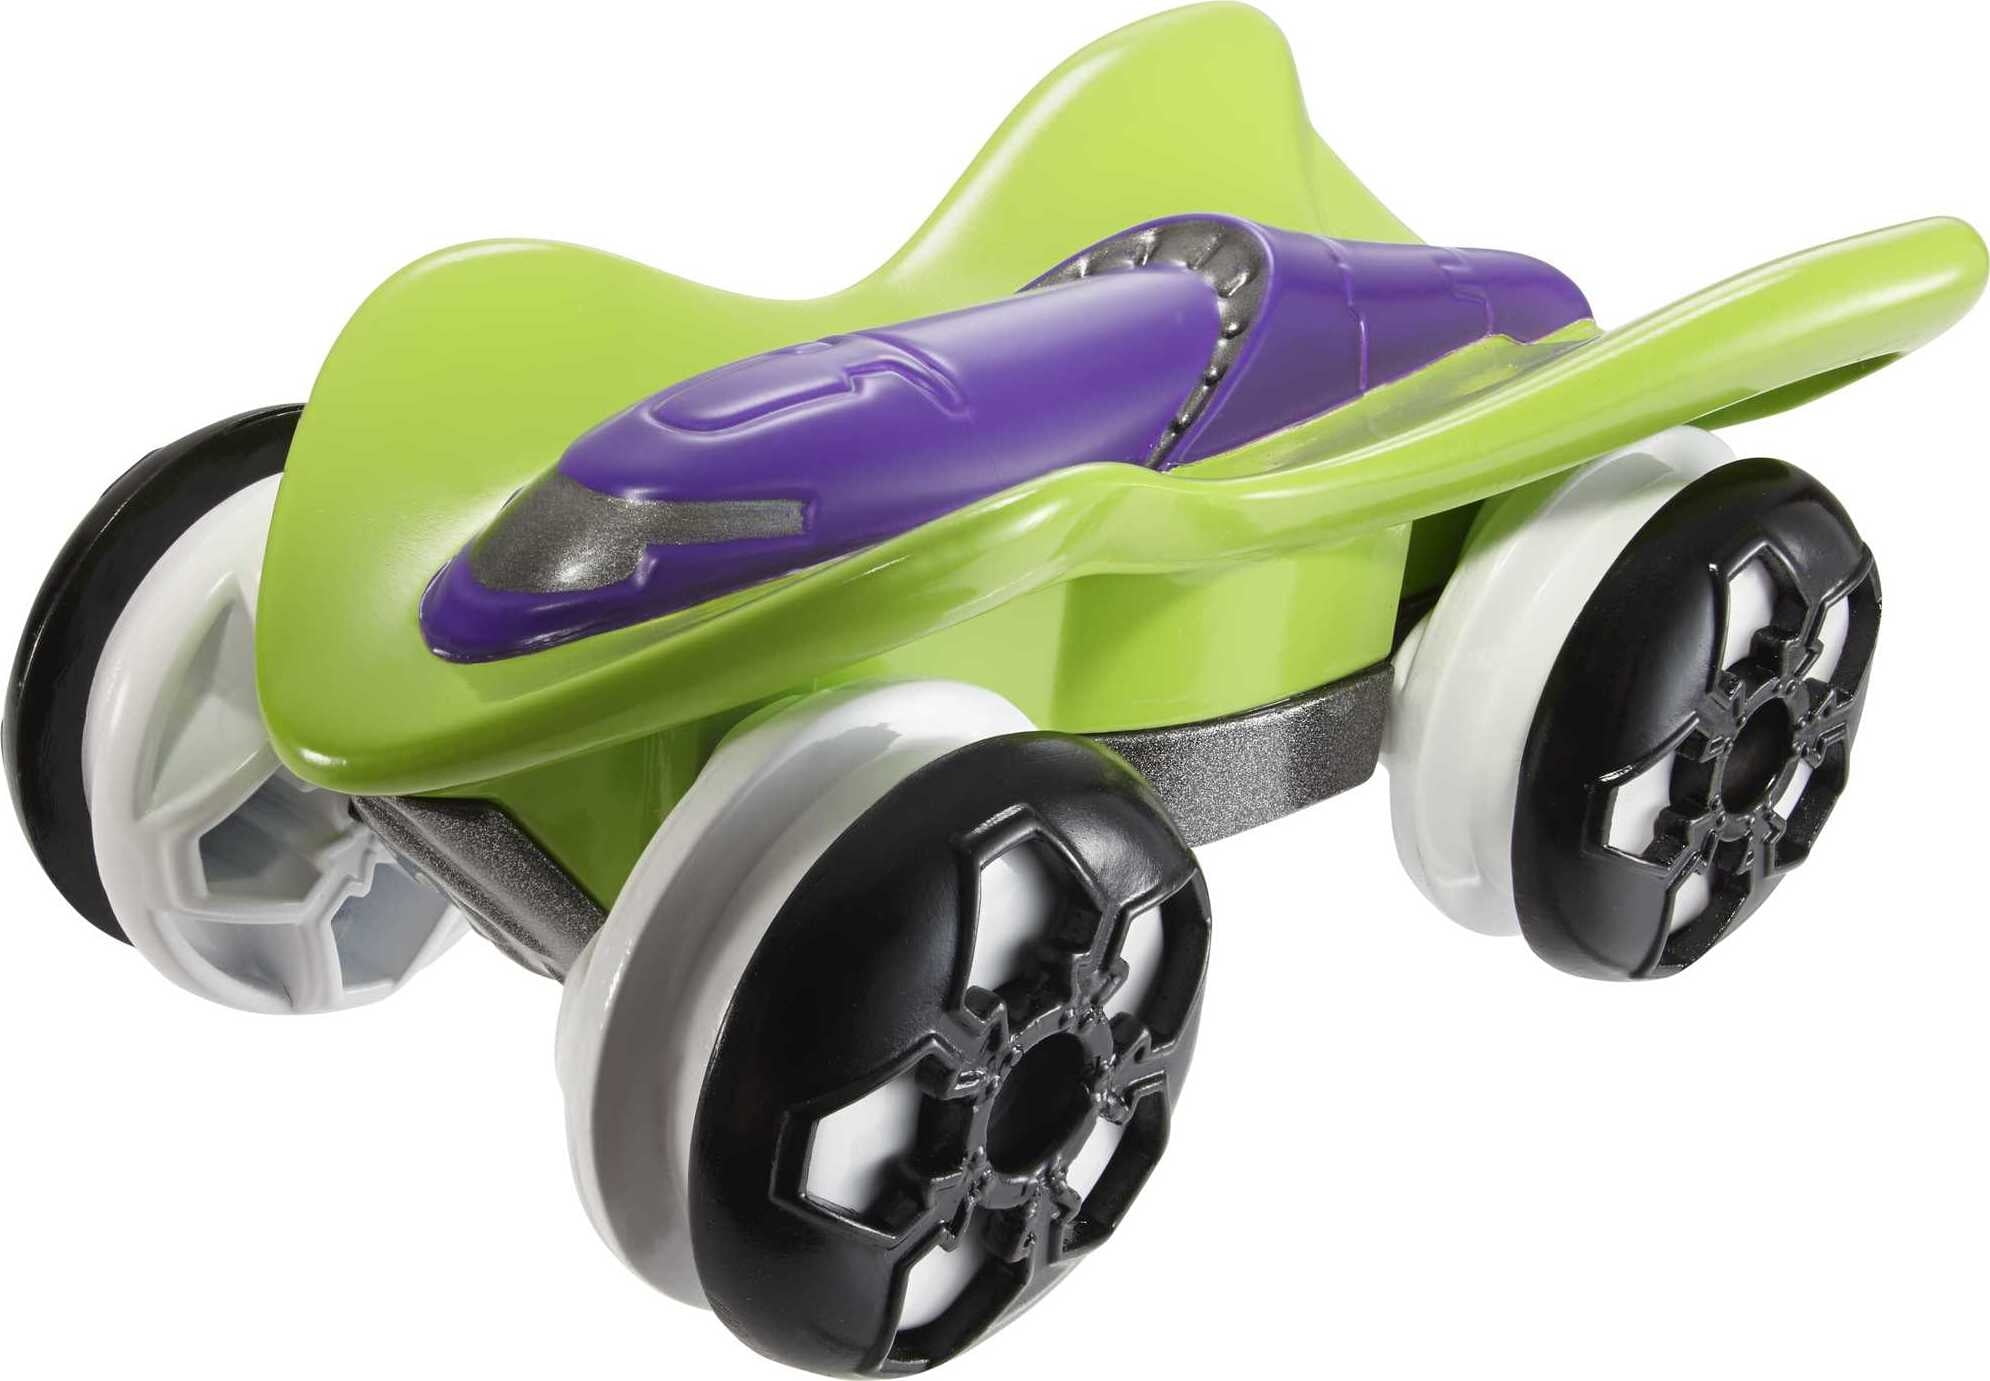 Hot Wheels Color Shifters 1:64 Scale Toy Car, Transforms Color in Water (Styles May Vary)